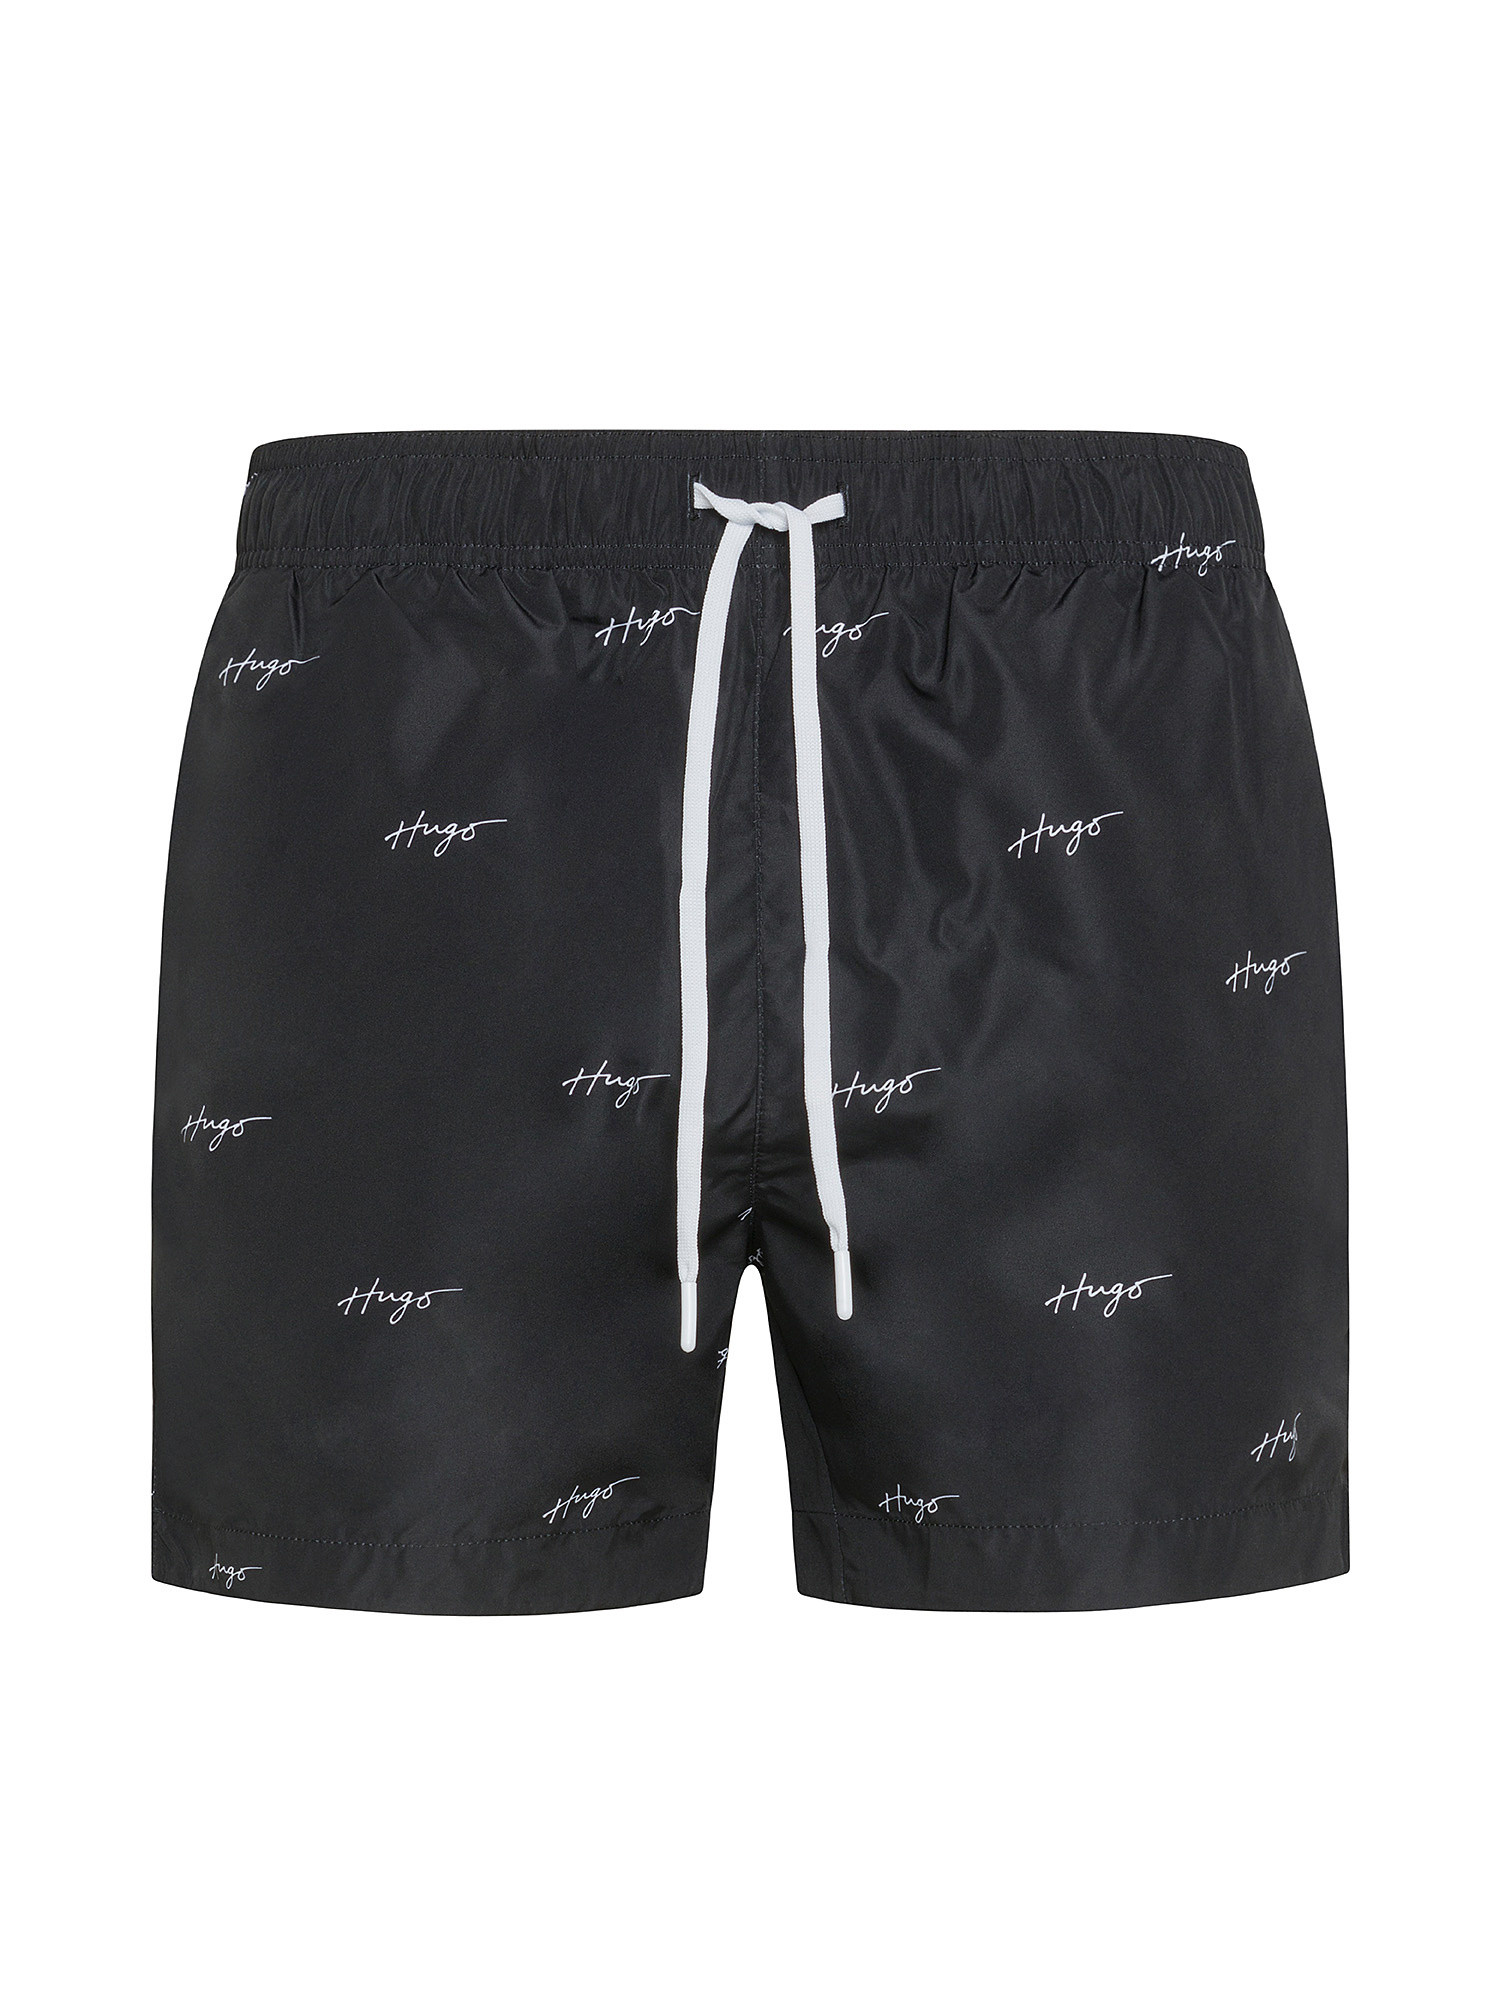 Hugo - Swim boxer in recycled fabric with logo, Black, large image number 0